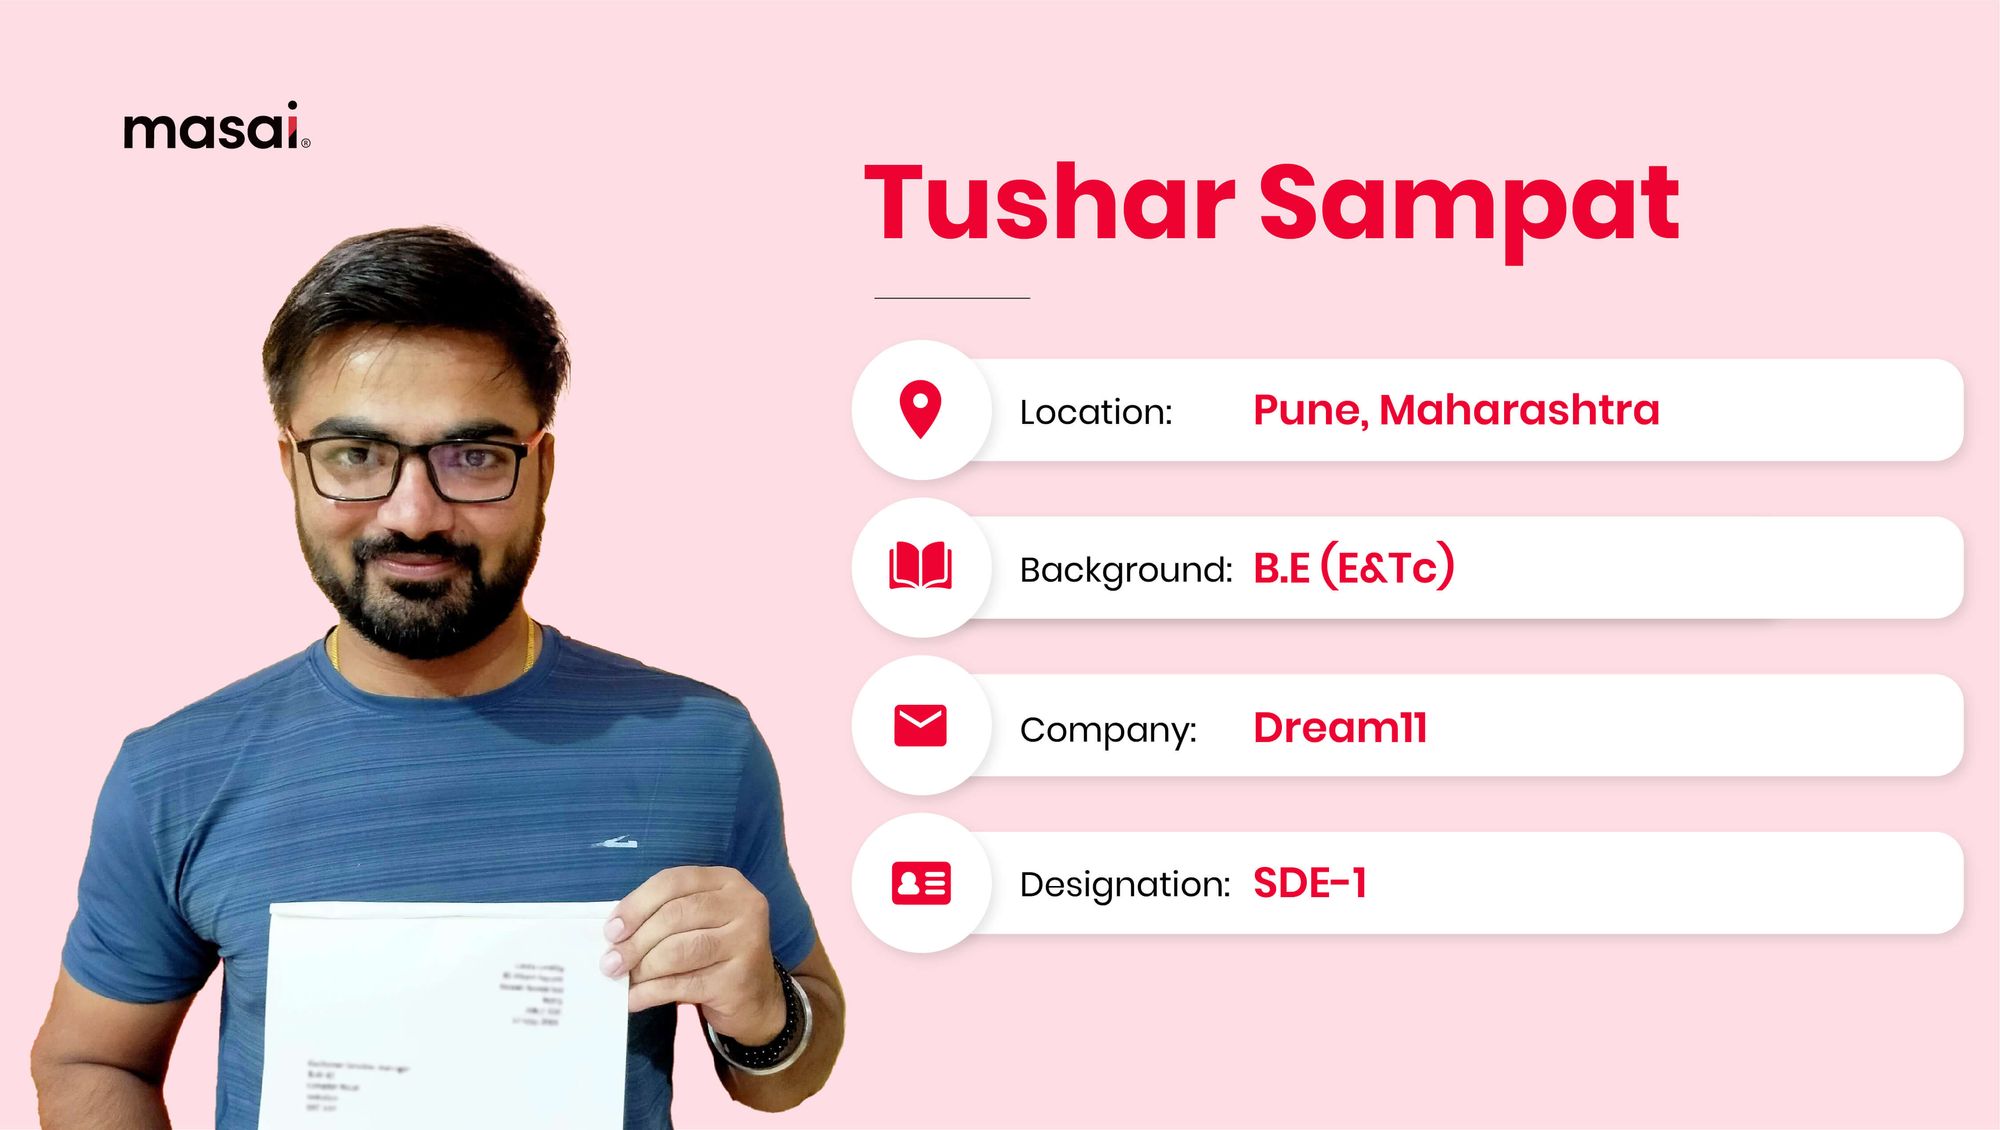 Tushar Sampat- A Masai student now working as SDE-1 at Dream11